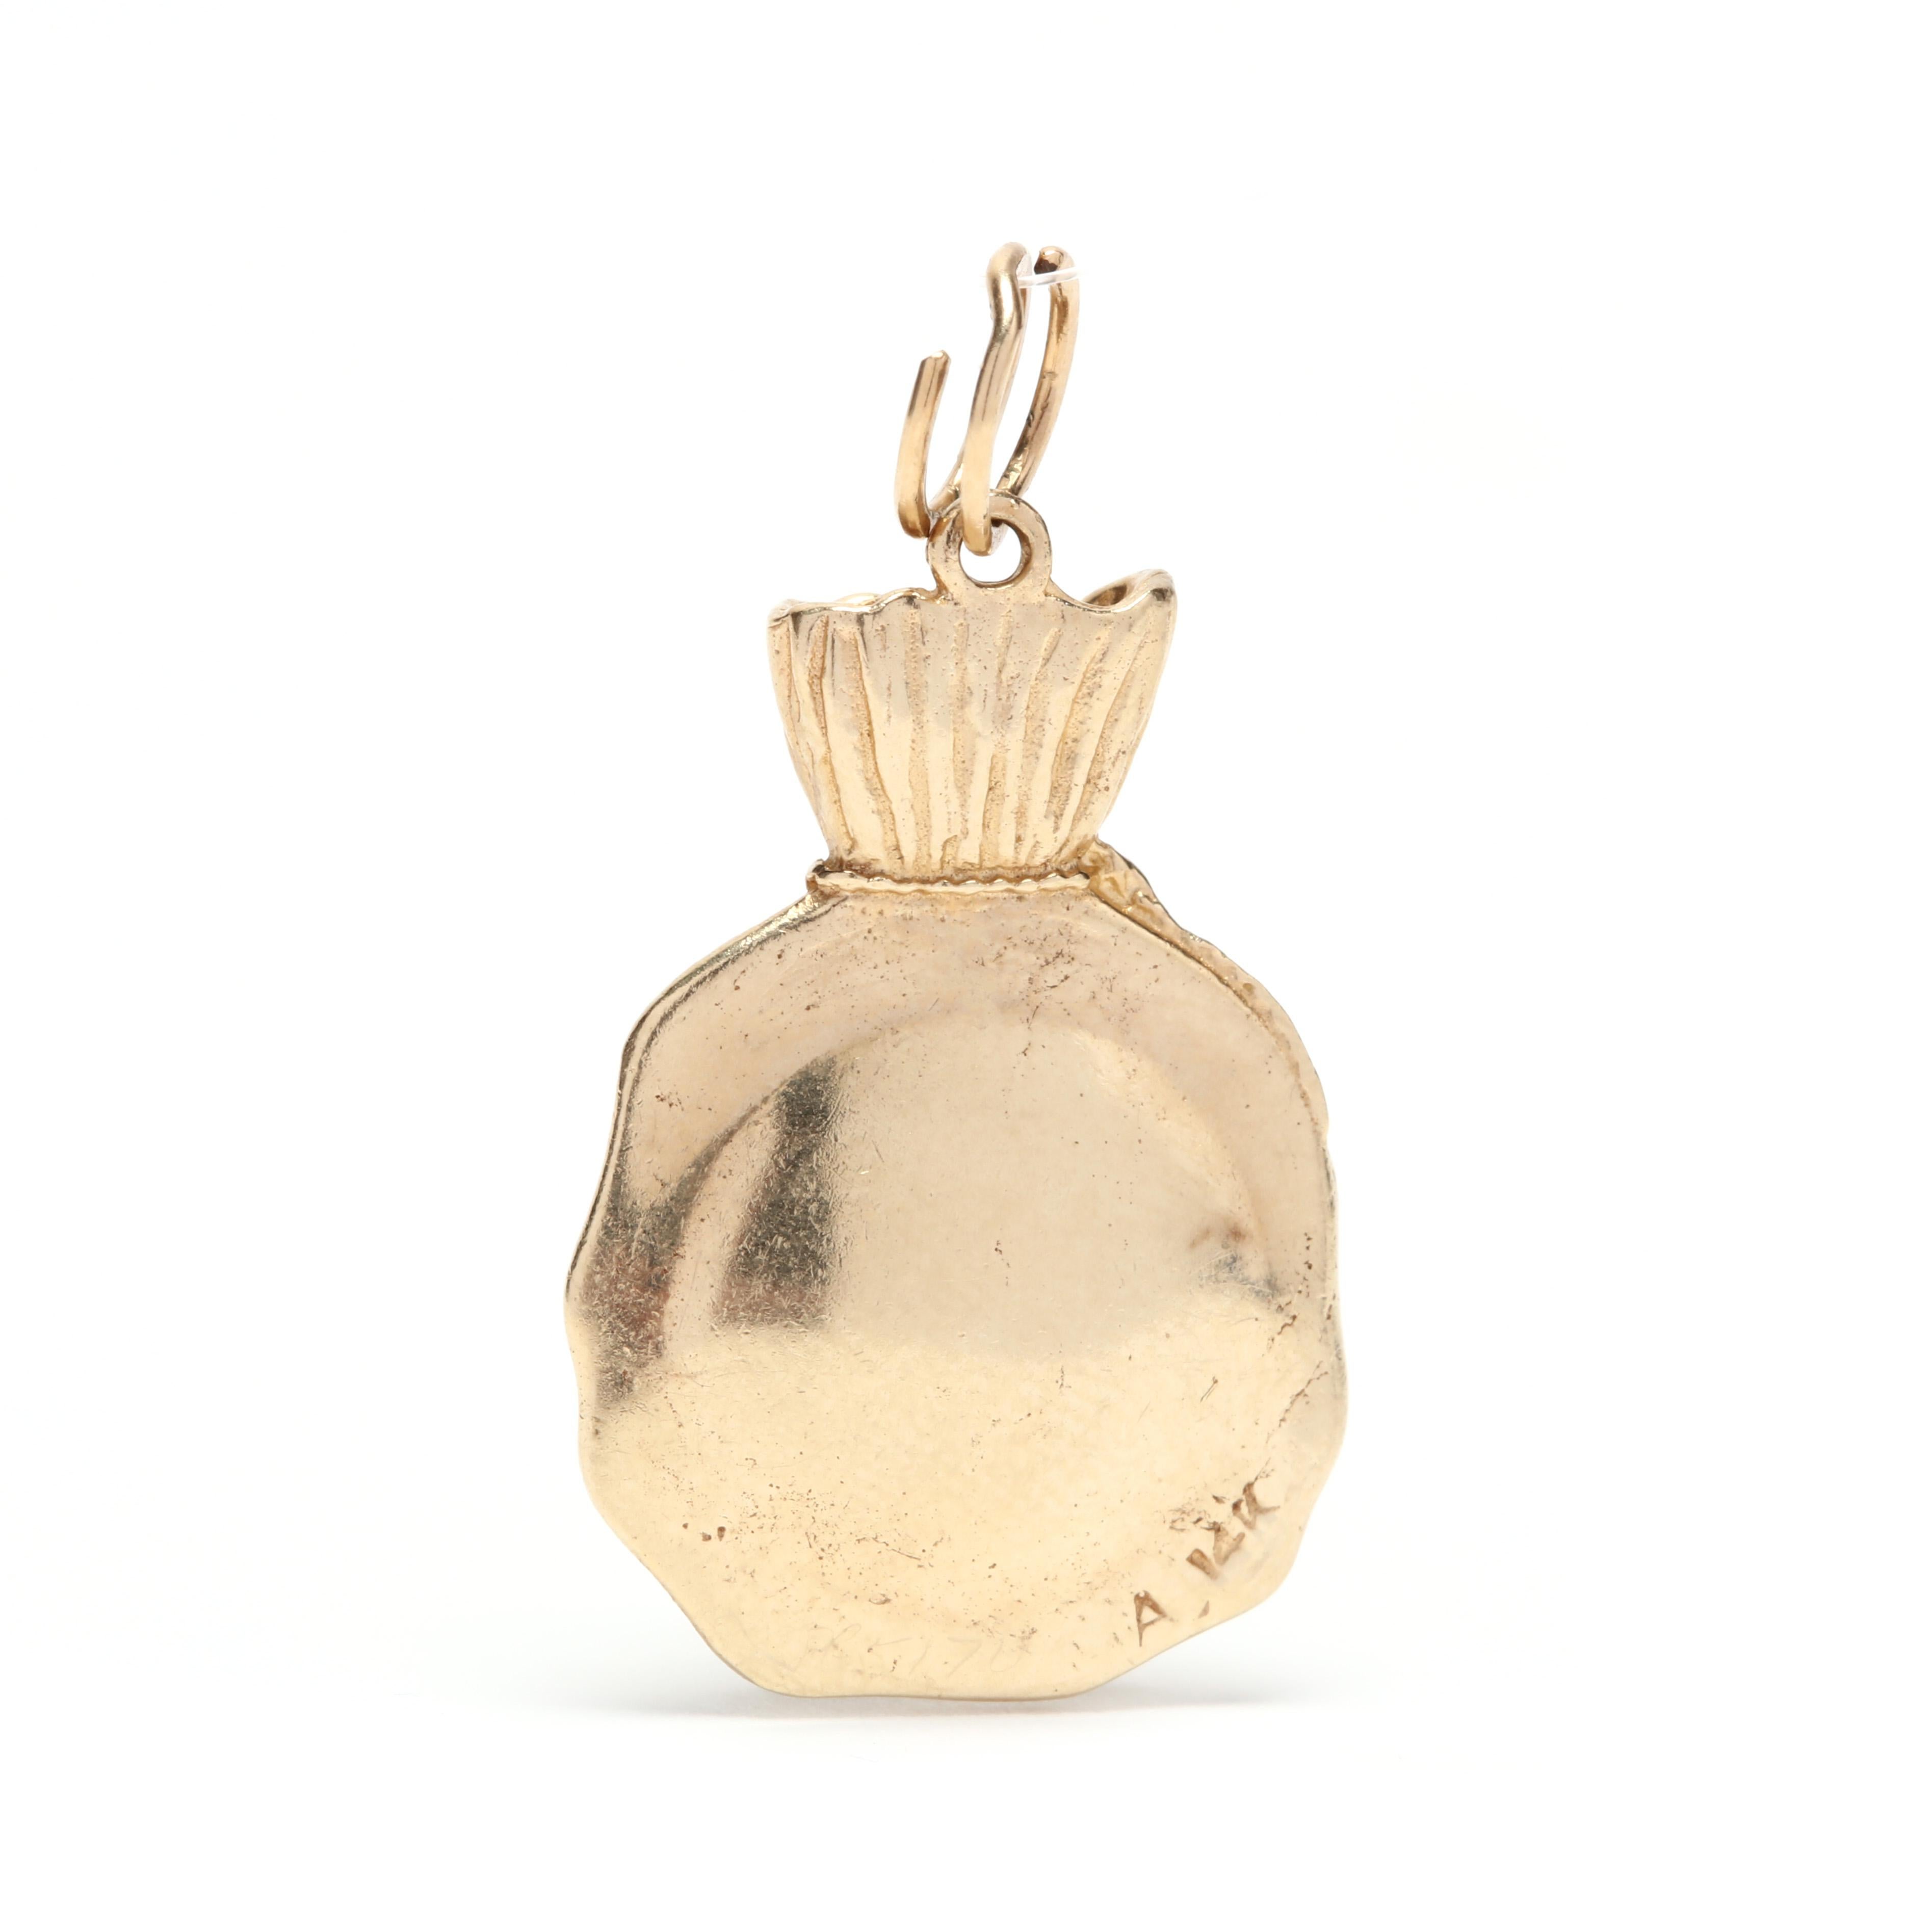 A vintage 14 karat yellow gold poke-o-gold money bag charm / pendant. This charm features a cinched bag motif with a clear dome with gold nuggets inside.

Length: 1.25 in.

Width: 3/4 in.

3.48 dwts.

* Please note that this is a vintage item and